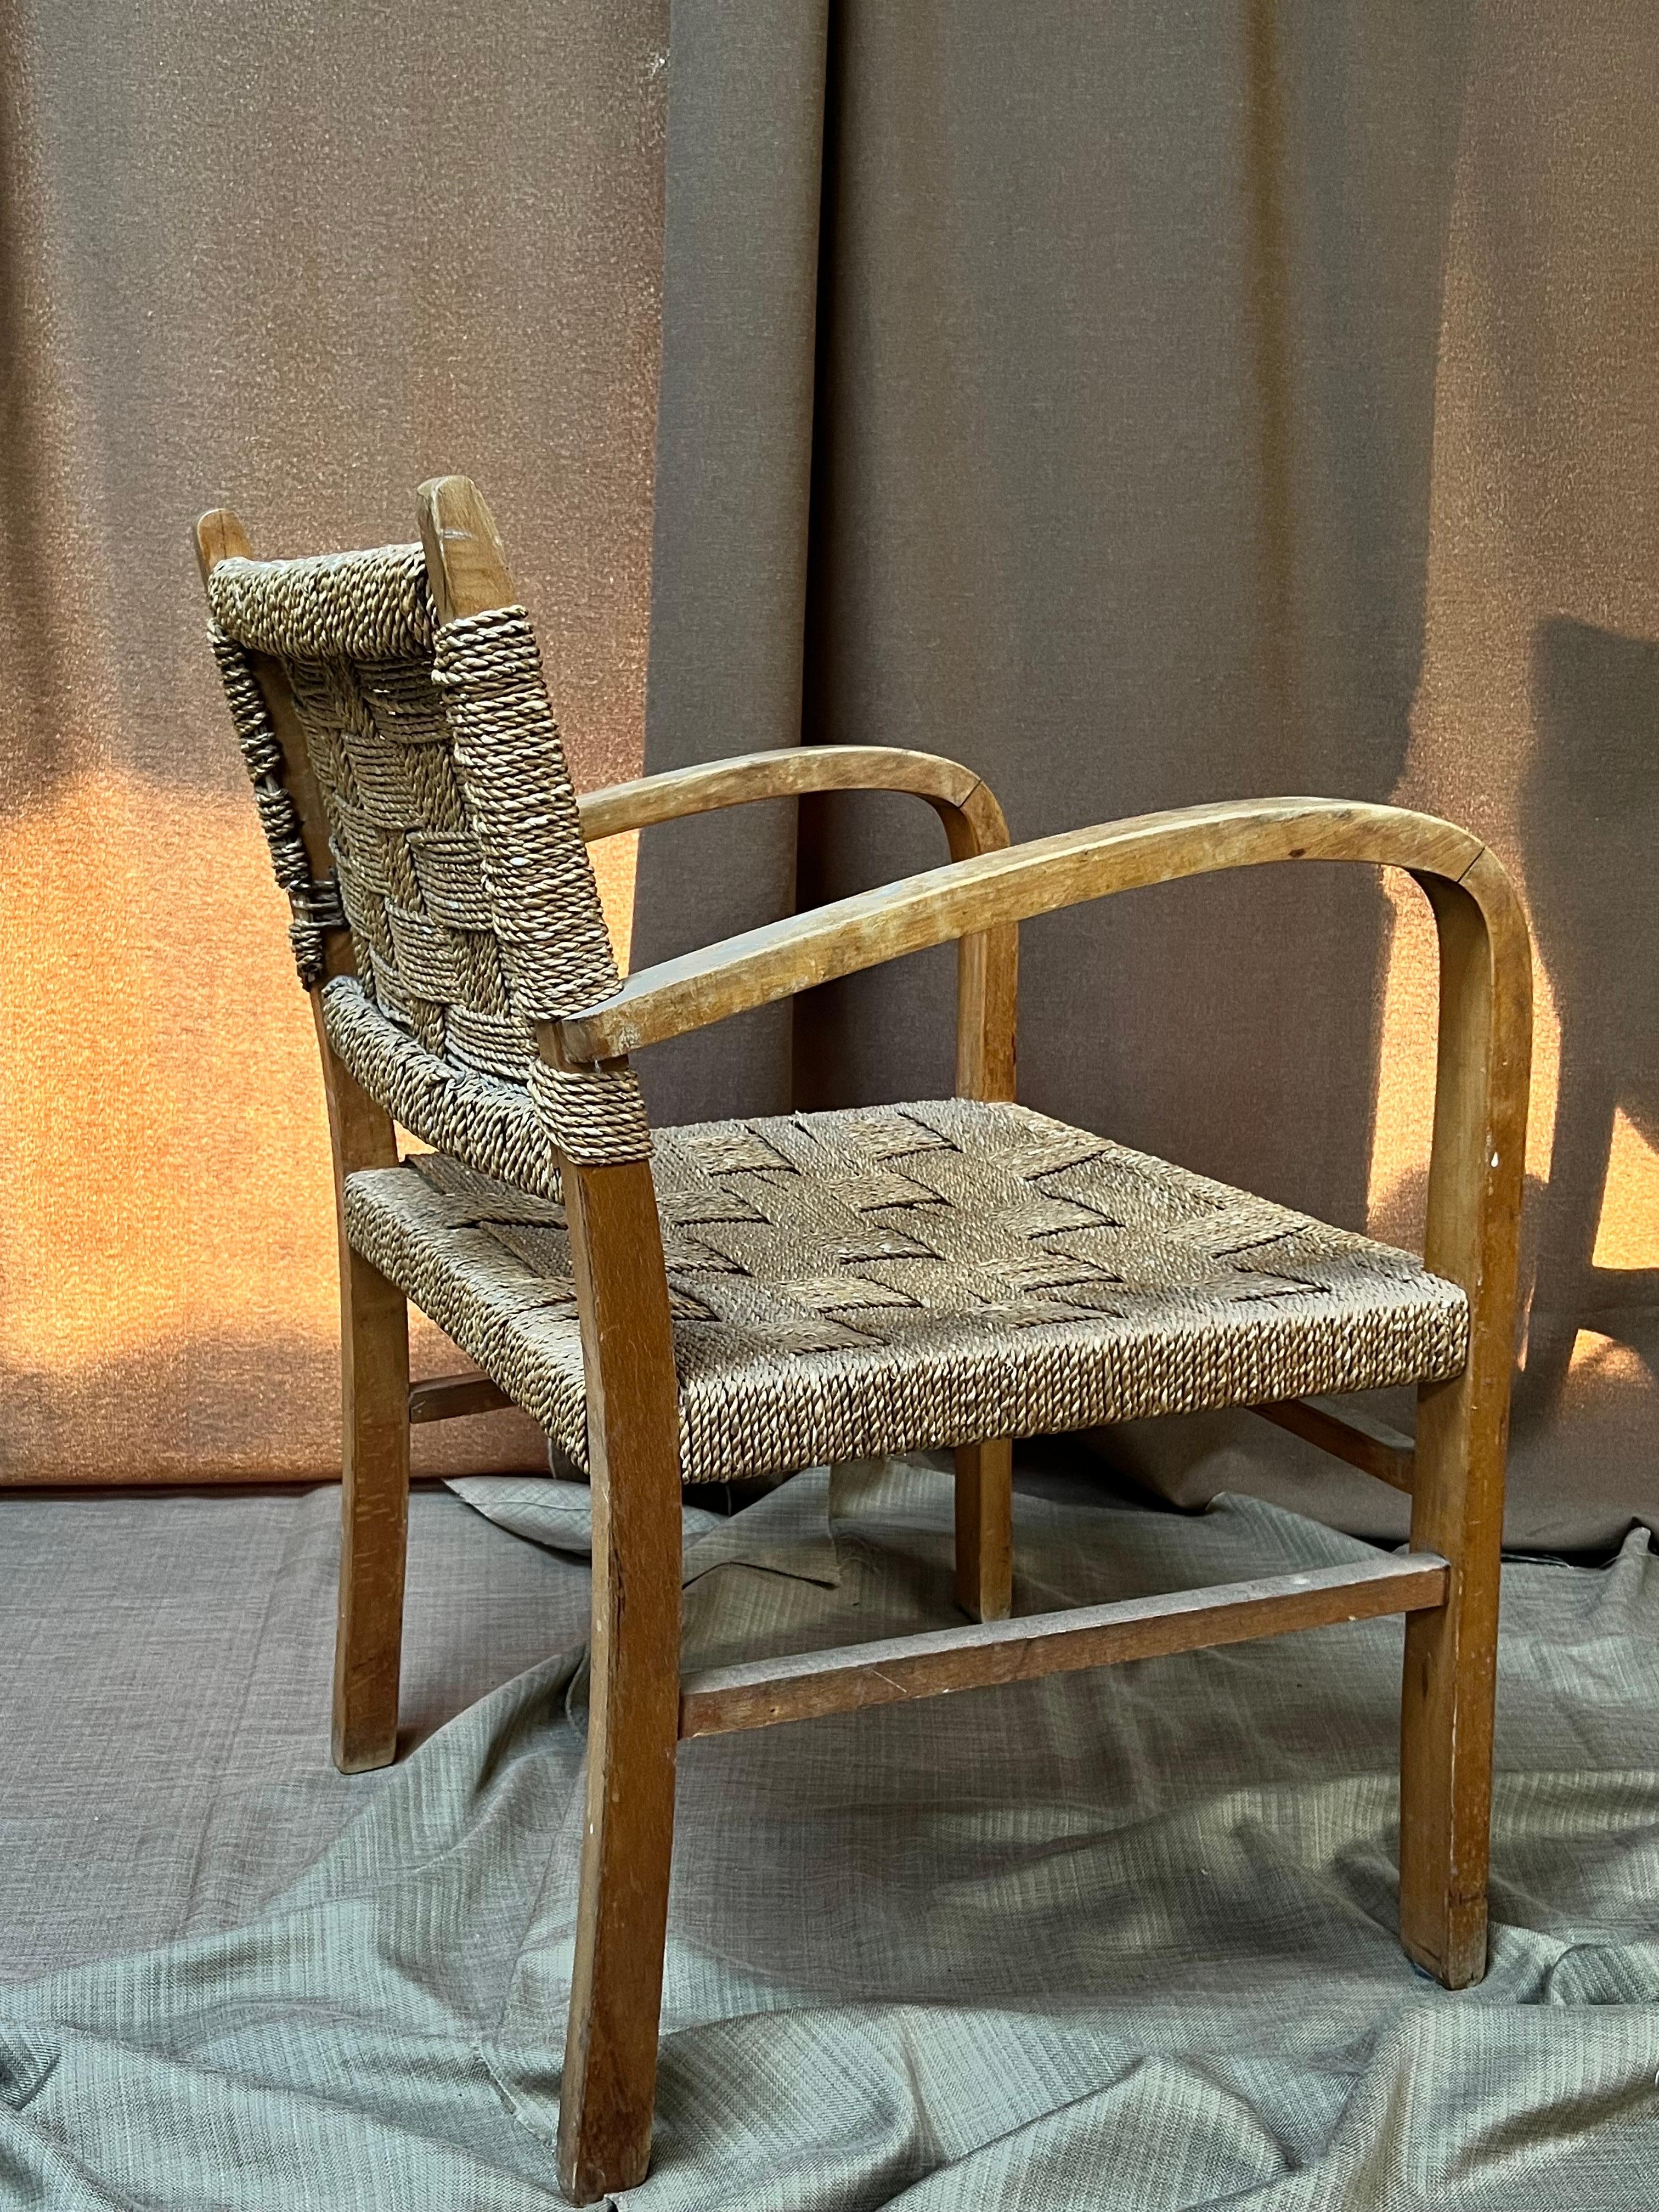 Wooden armchair by modernist Erich Dieckmann. Made of massive bentwood and rope. Elegant and minimalist with a great combination of materials. Lightweight, easy to move around. The seat and back are soft and 